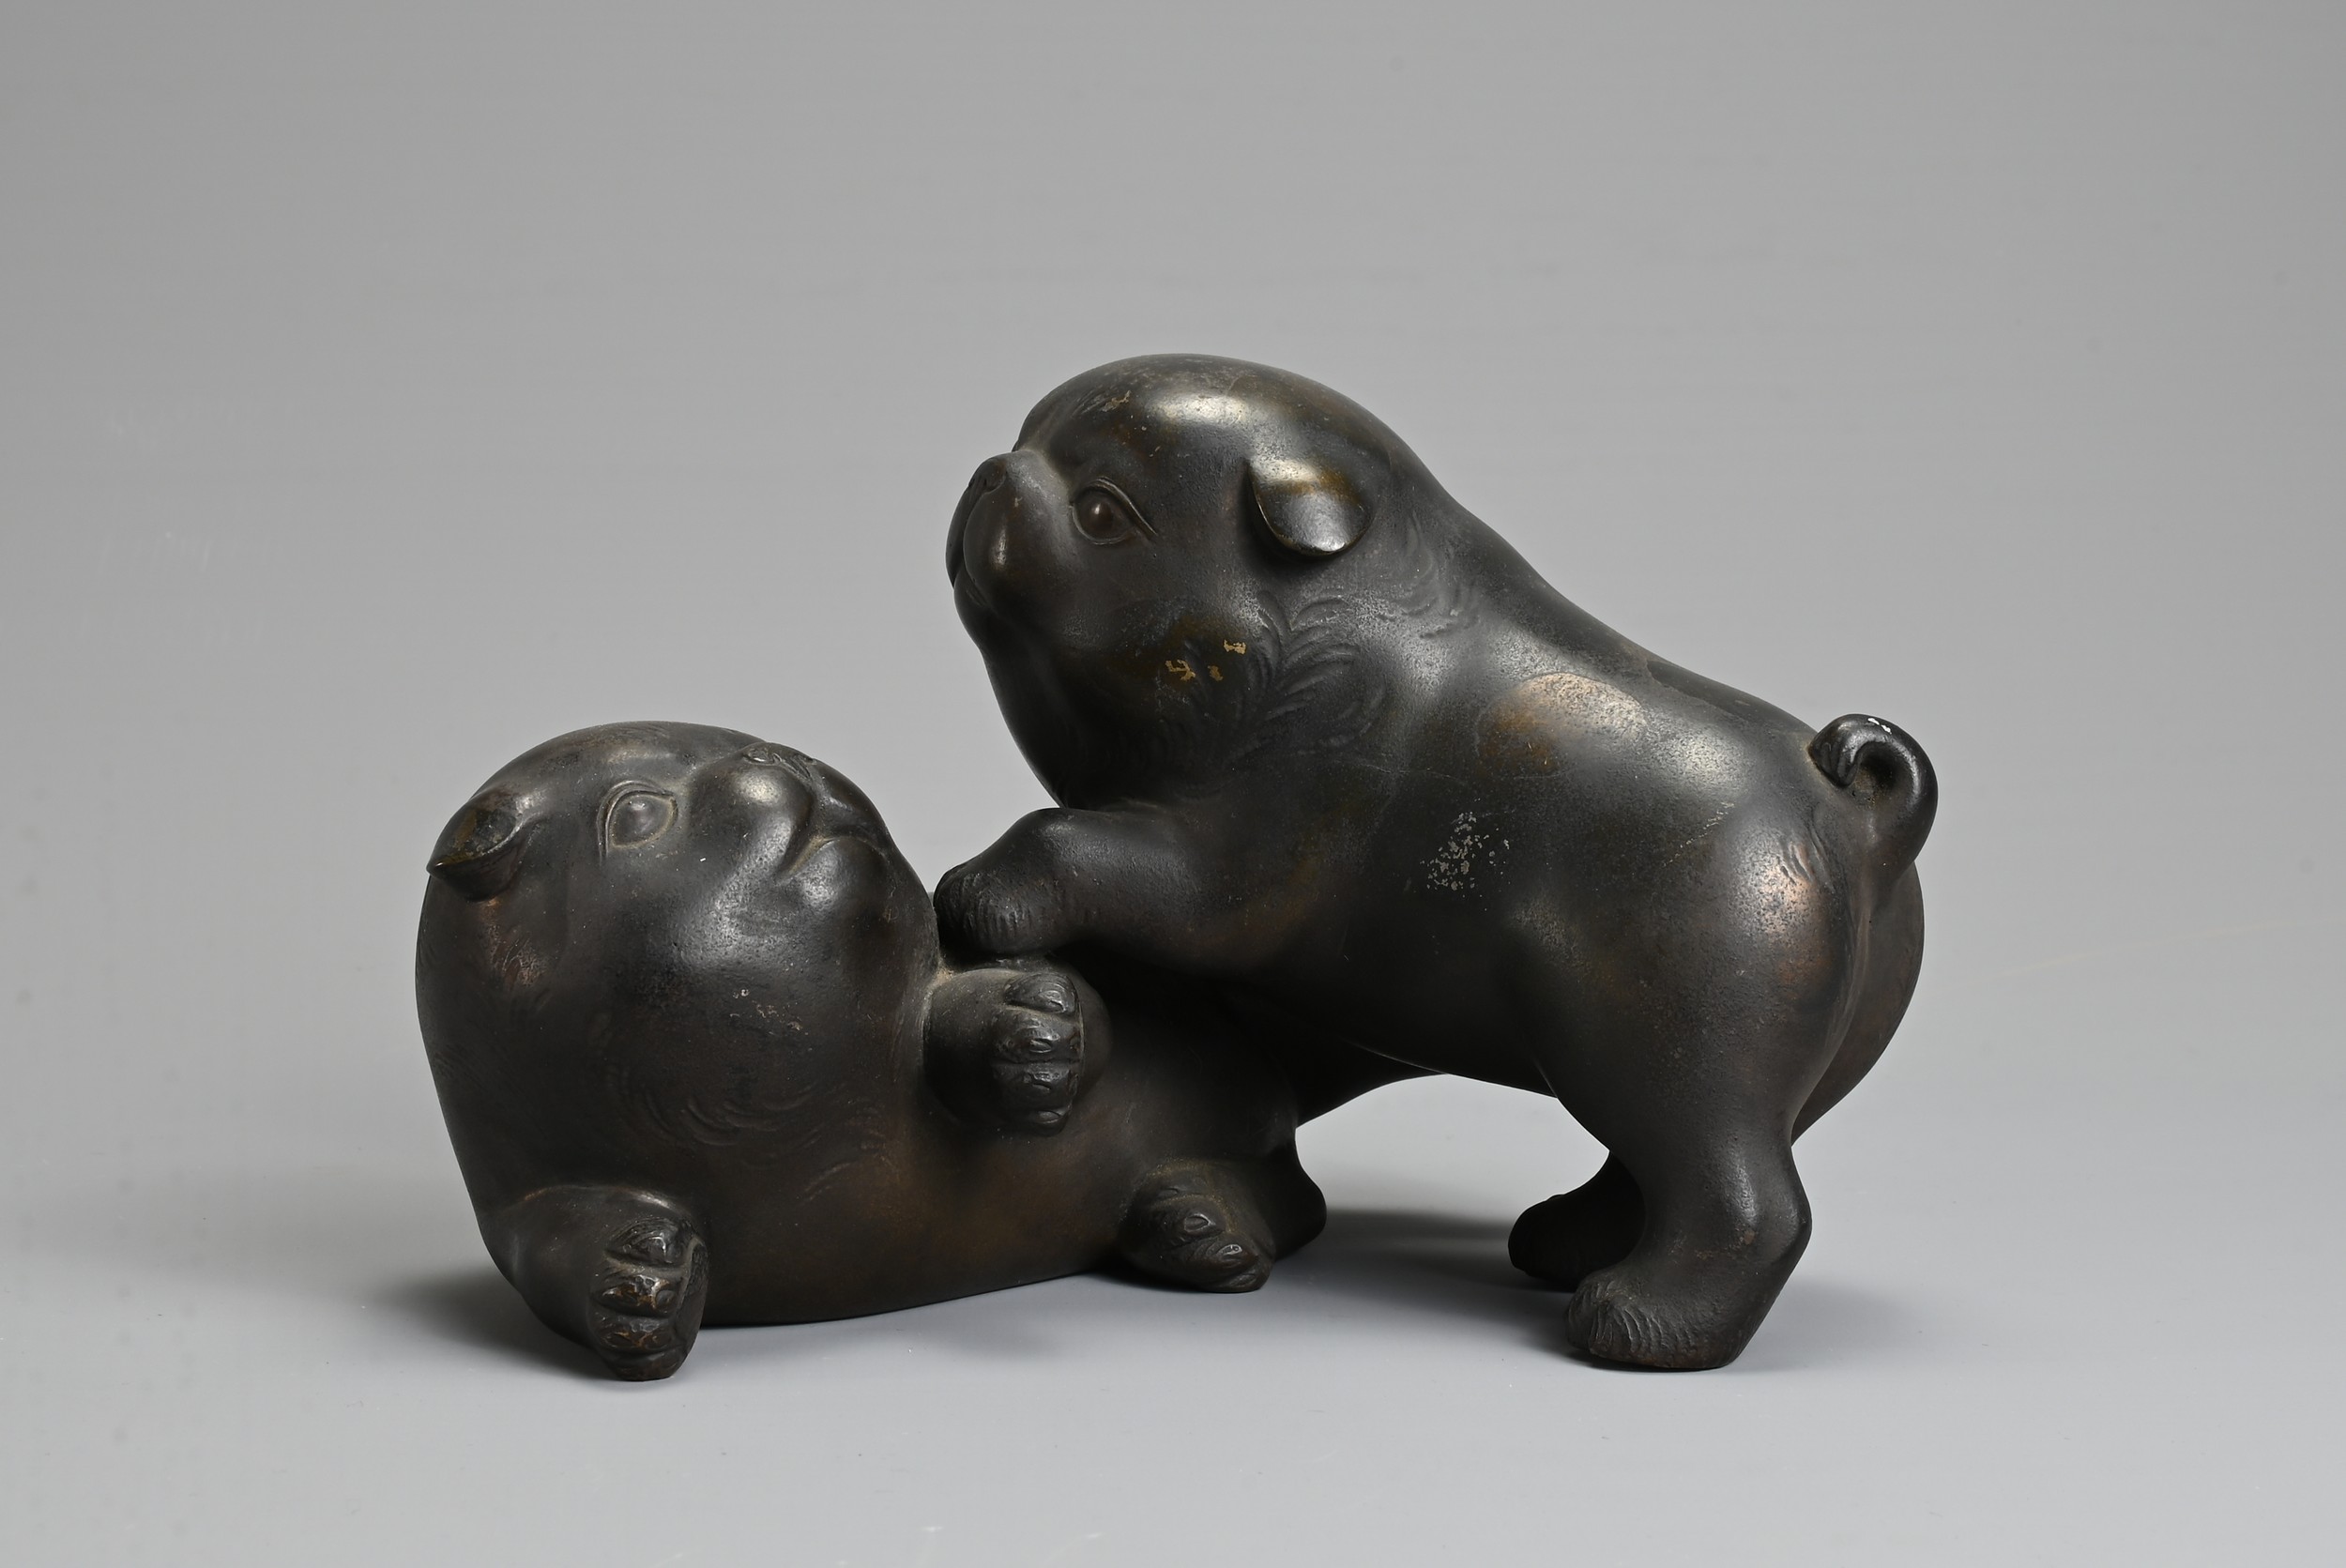 AN EARLY 20TH CENTURY JAPANESE BRONZE OF TWO PUPPIES PLAYING. Signed Tokutani with seal mark to